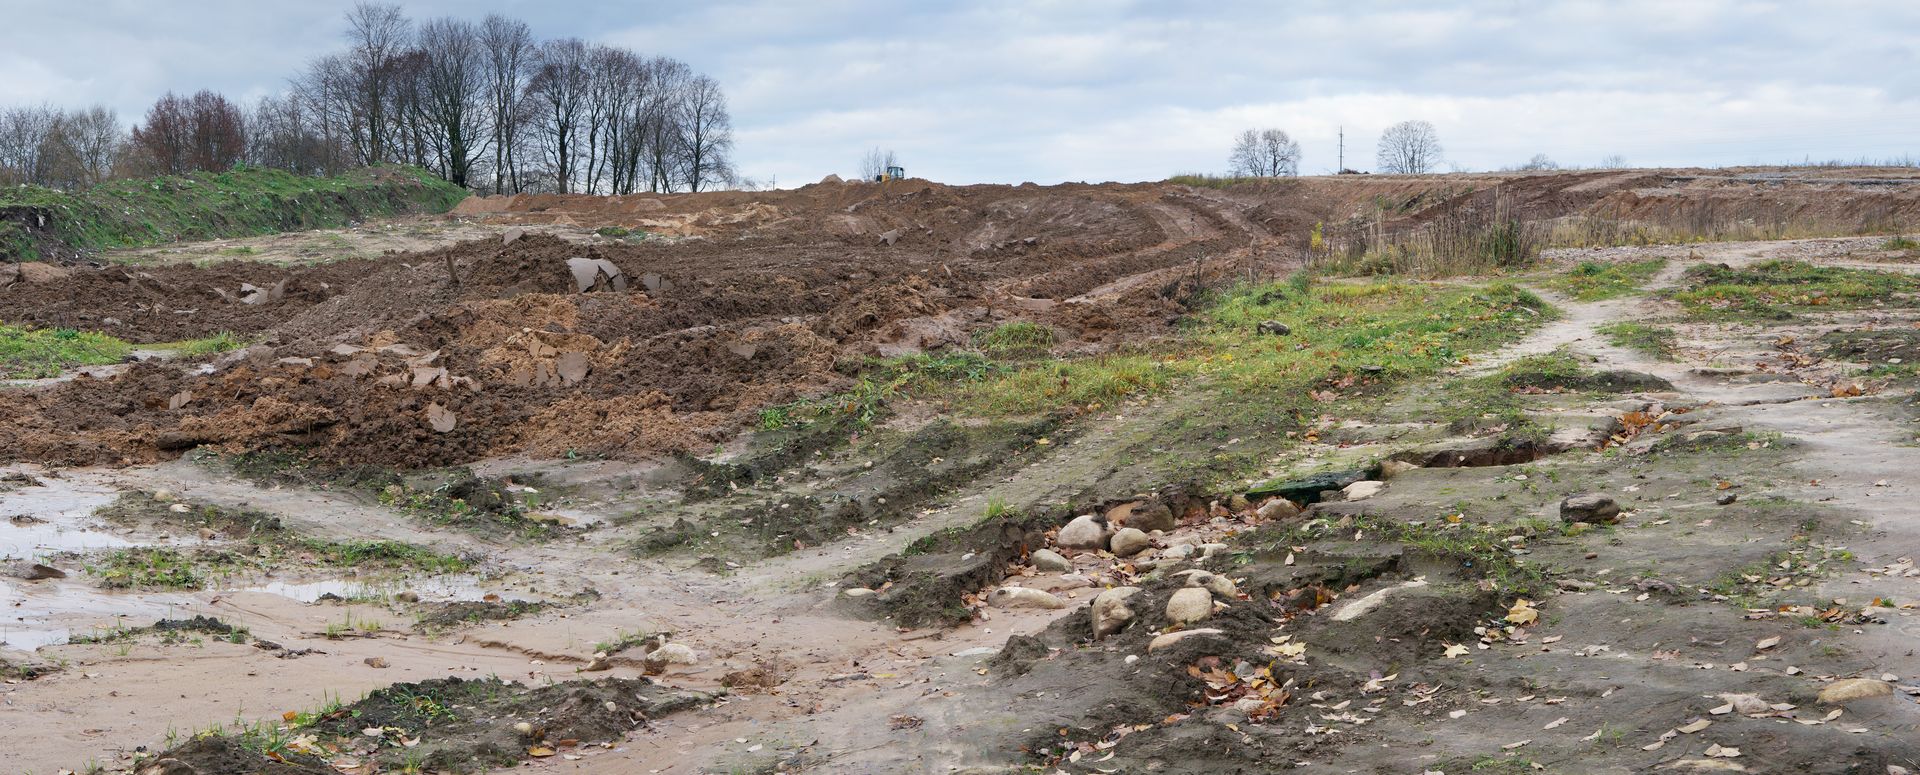 Topsoil erosion significantly degrades the quality of soil